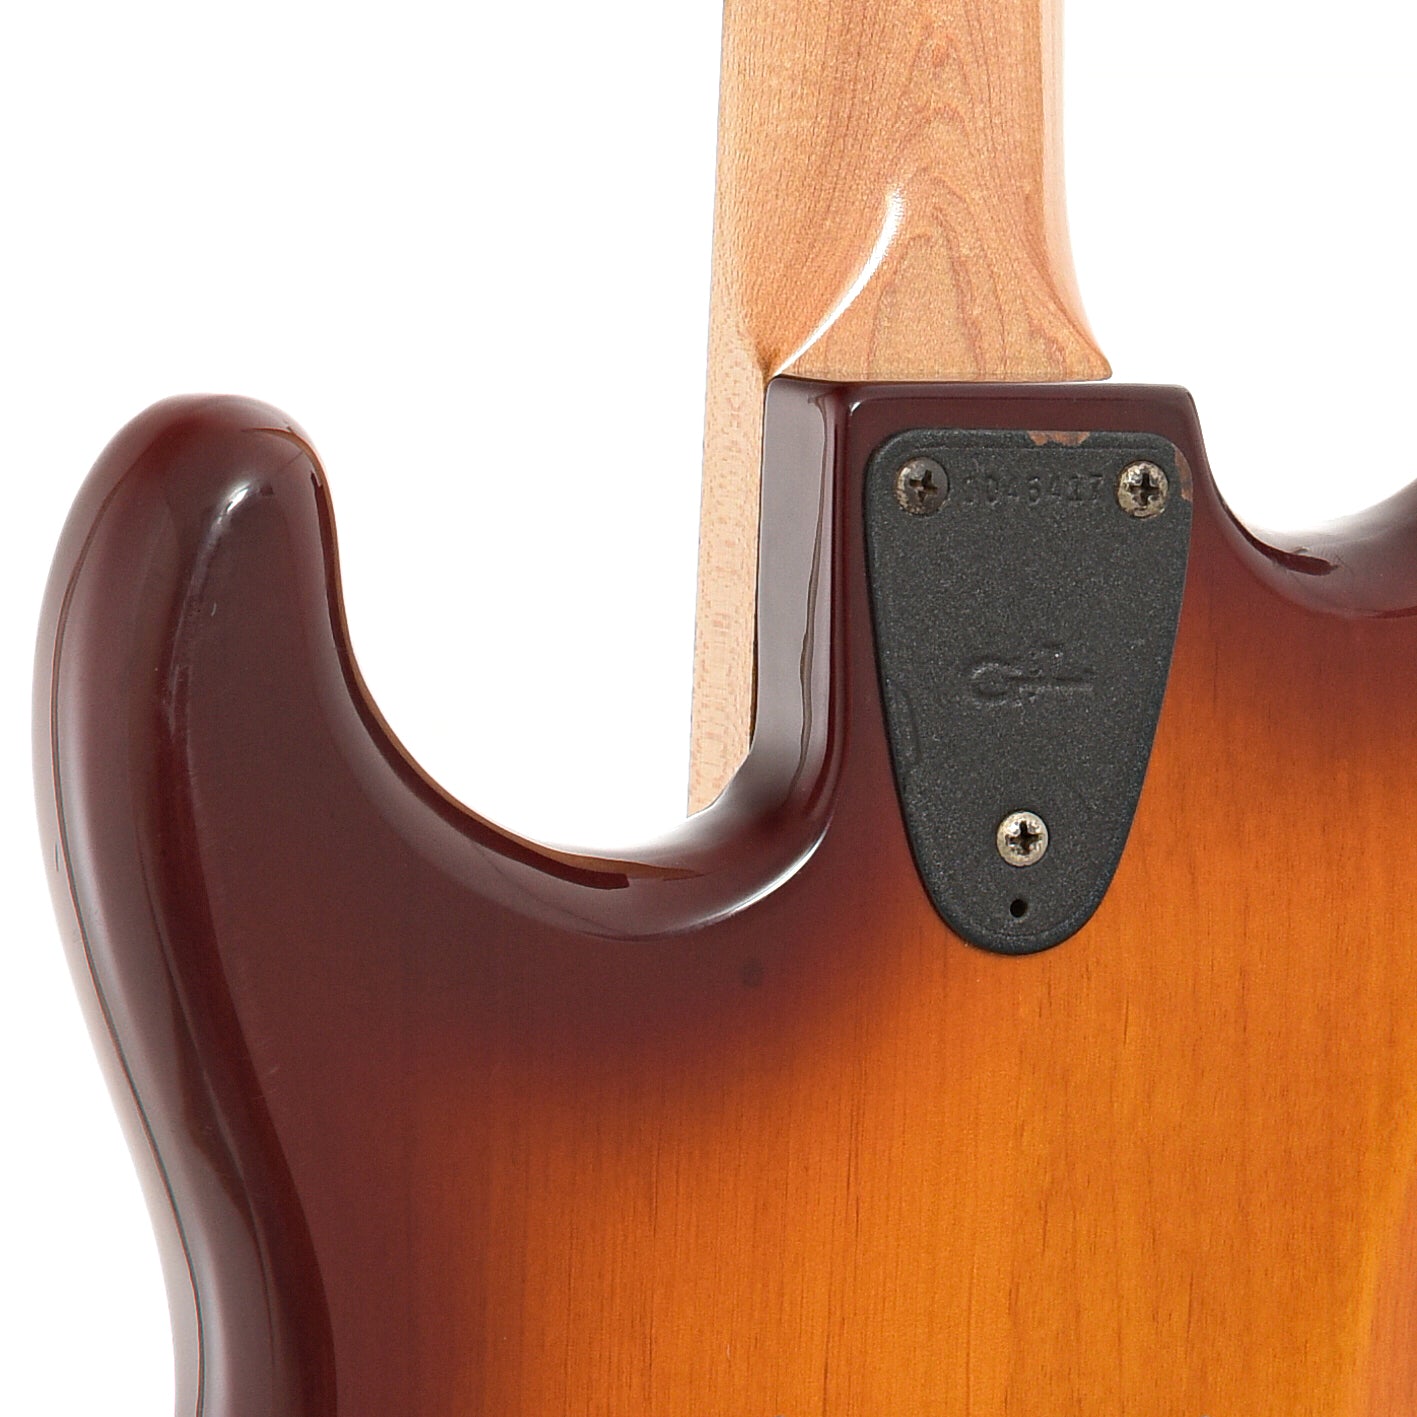 Neck joint of G&L Legacy